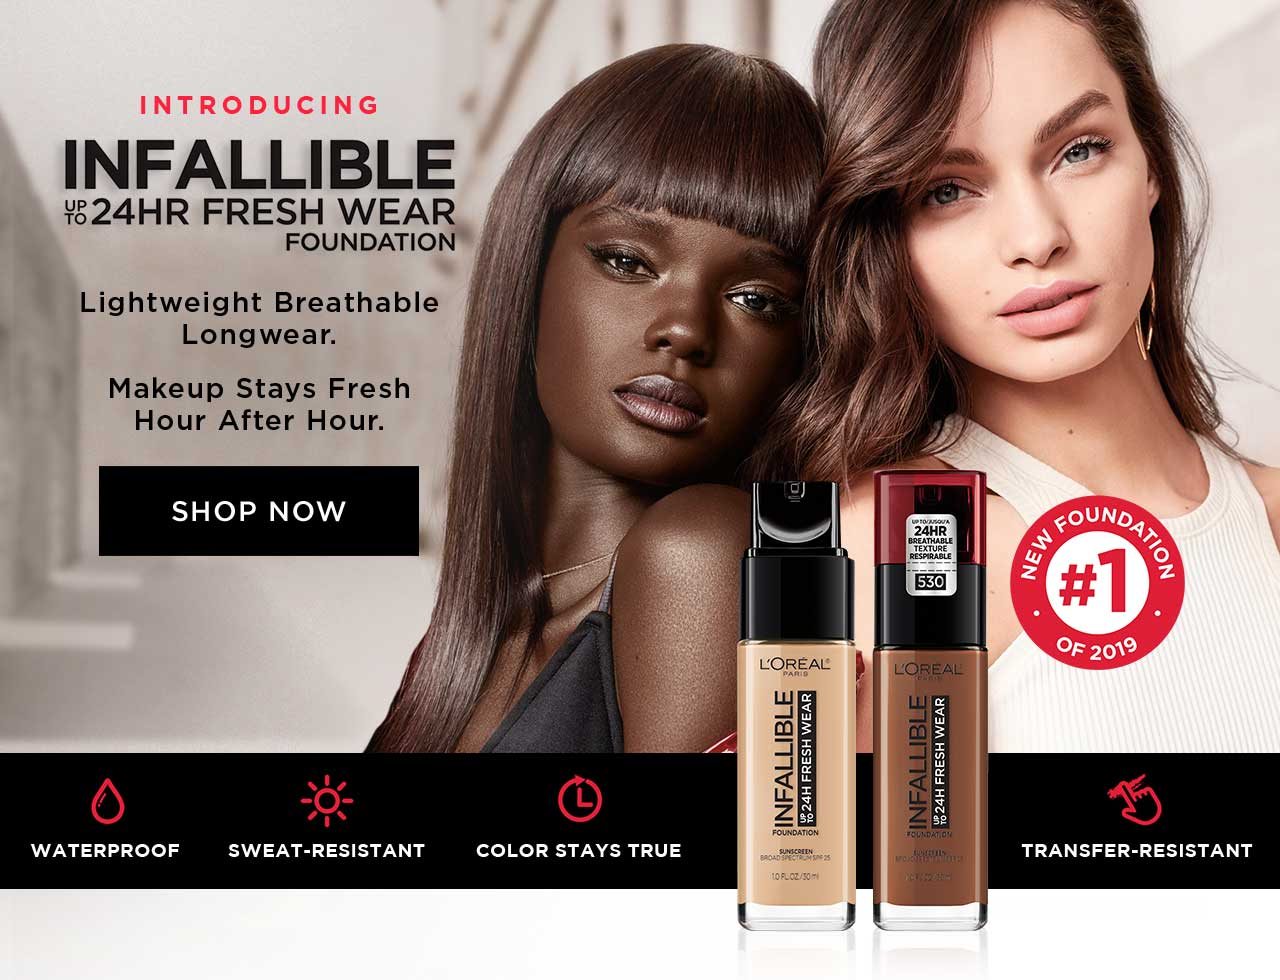 INTRODUCING INFALLIBLE UP TO 24 HR FRESH WEAR FOUNDATION - Lightweight Breathable Longwear. - Makeup Stays Fresh Hour After Hour. - SHOP NOW - NUMBER 1 NEW FOUNDATION OF 2019 - WATERPROOF - SWEAT-RESISTANT - COLOR STAYS TRUE - TRANSFER-RESISTANT